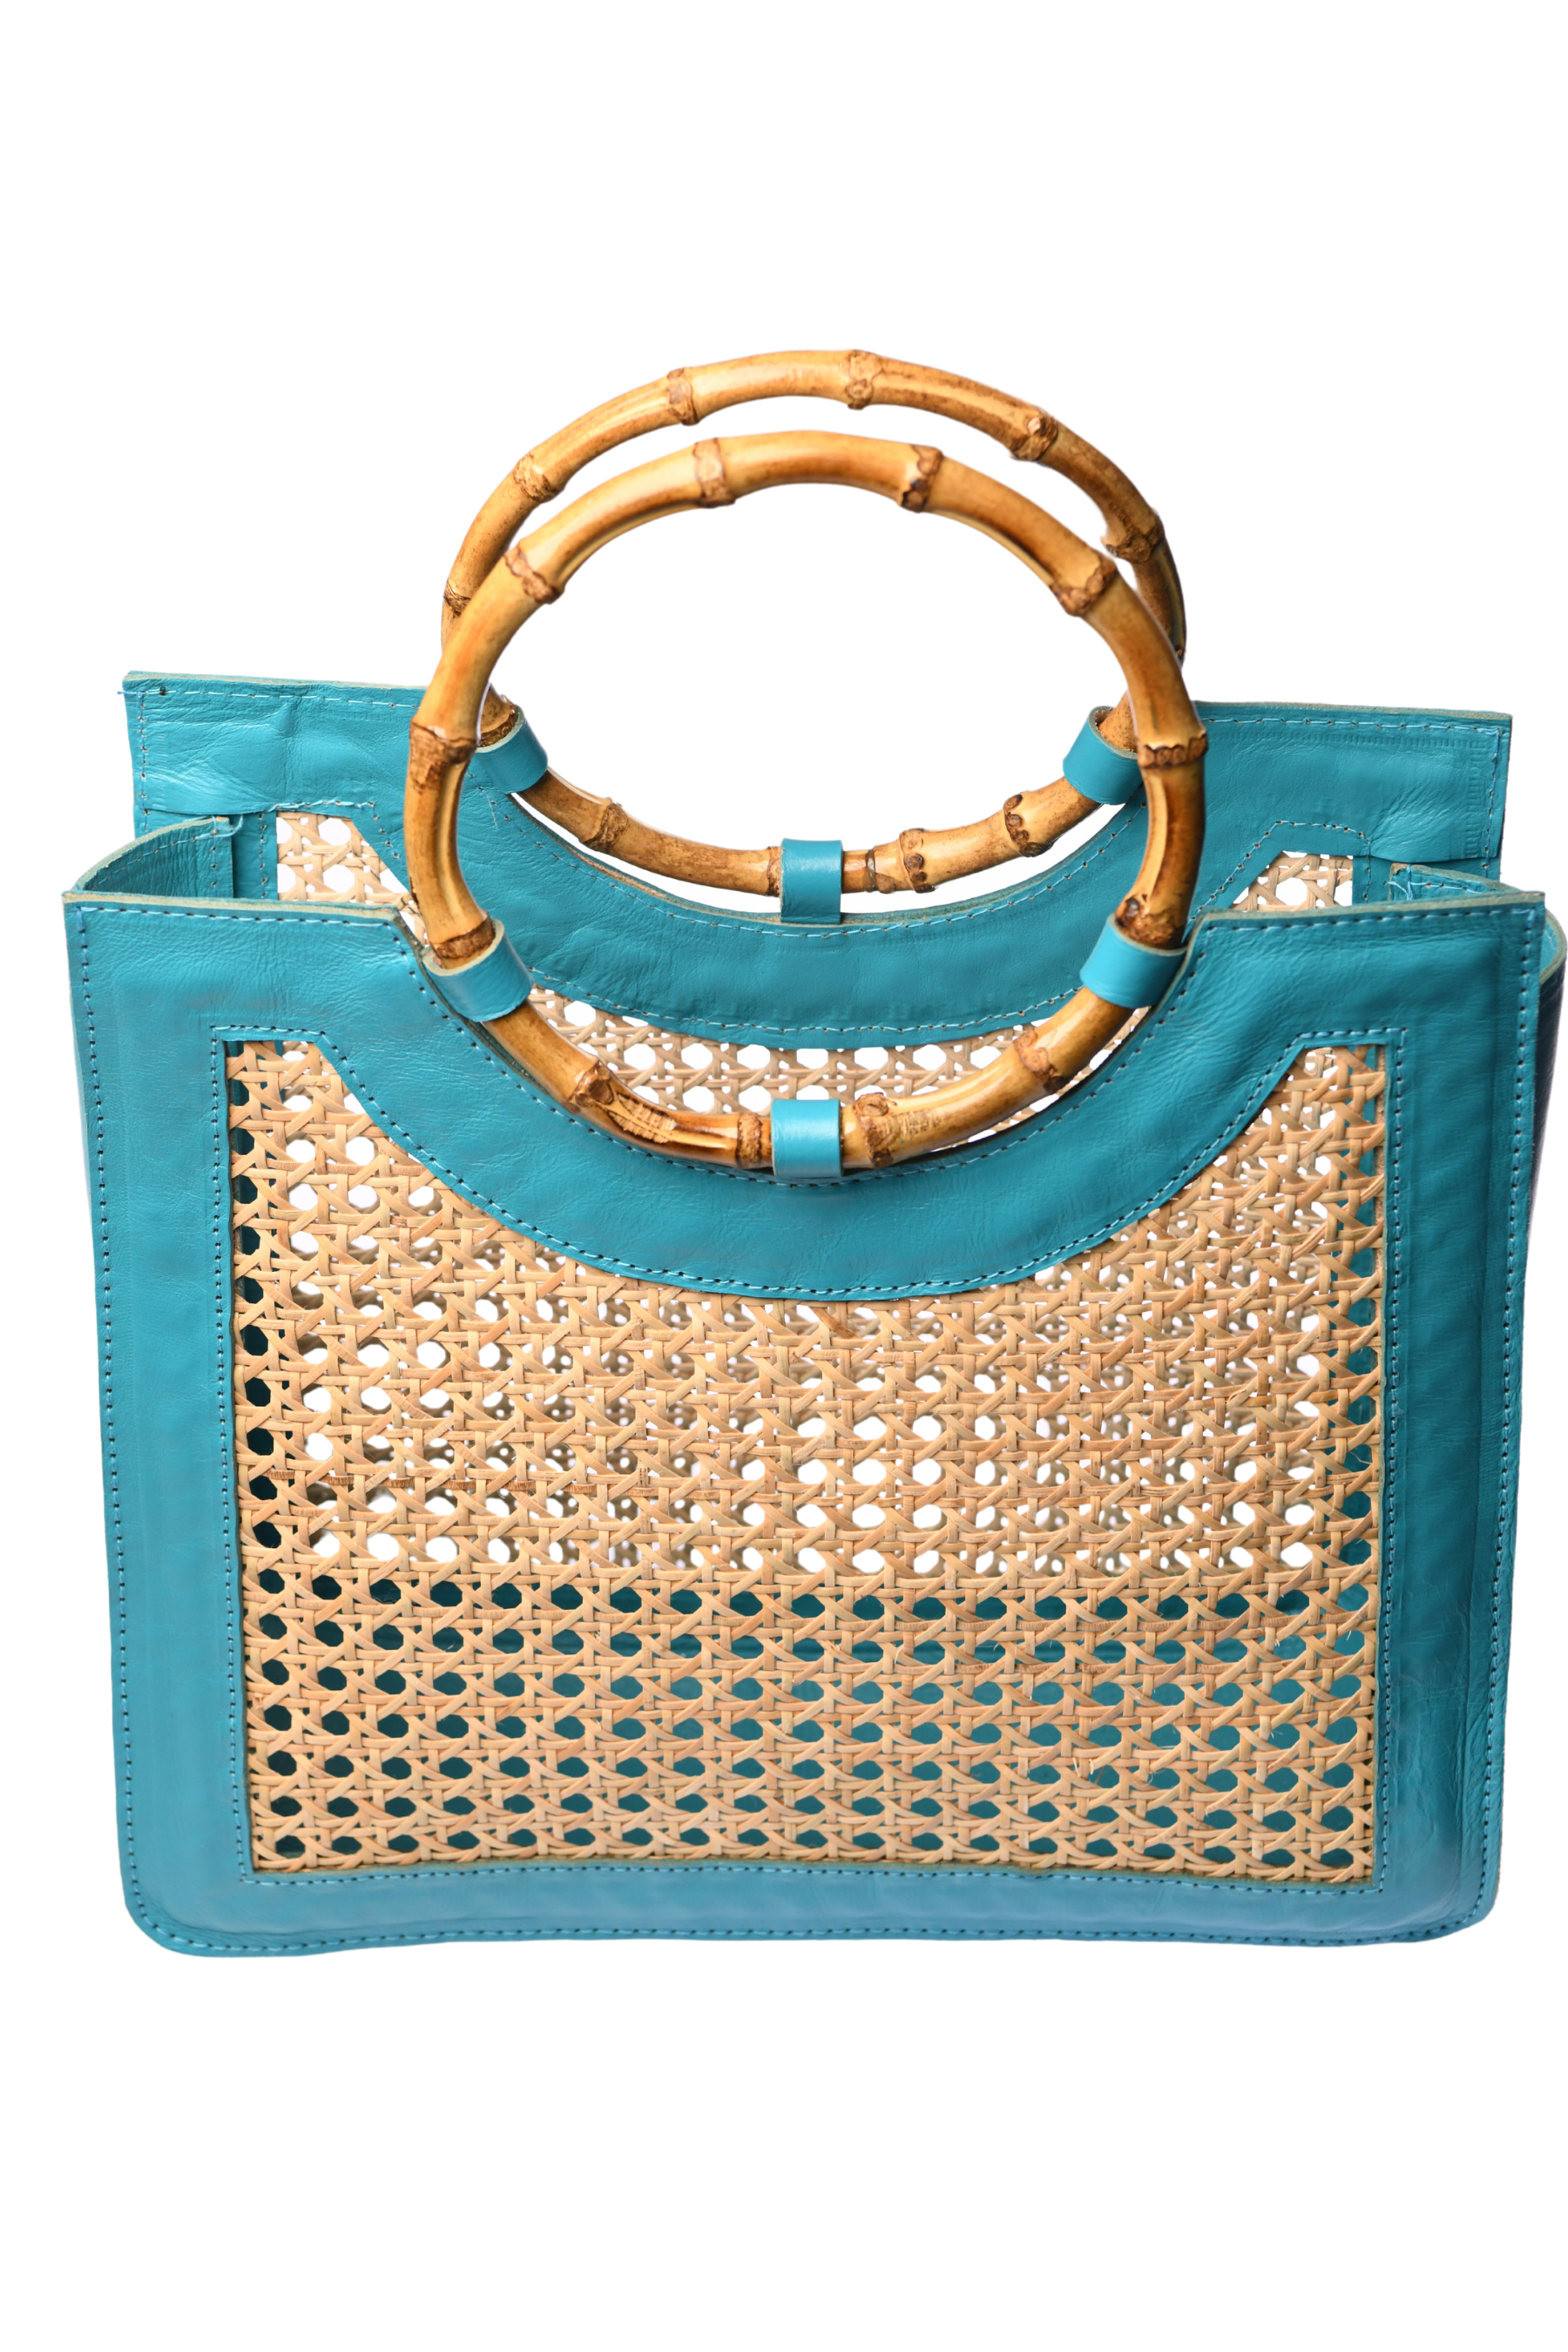 Travelwant Straw Bags for Women, Hand-woven Straw Small Hobo Bag Round  Handle Ring Tote Retro Summer Beach Rattan bag - Walmart.com